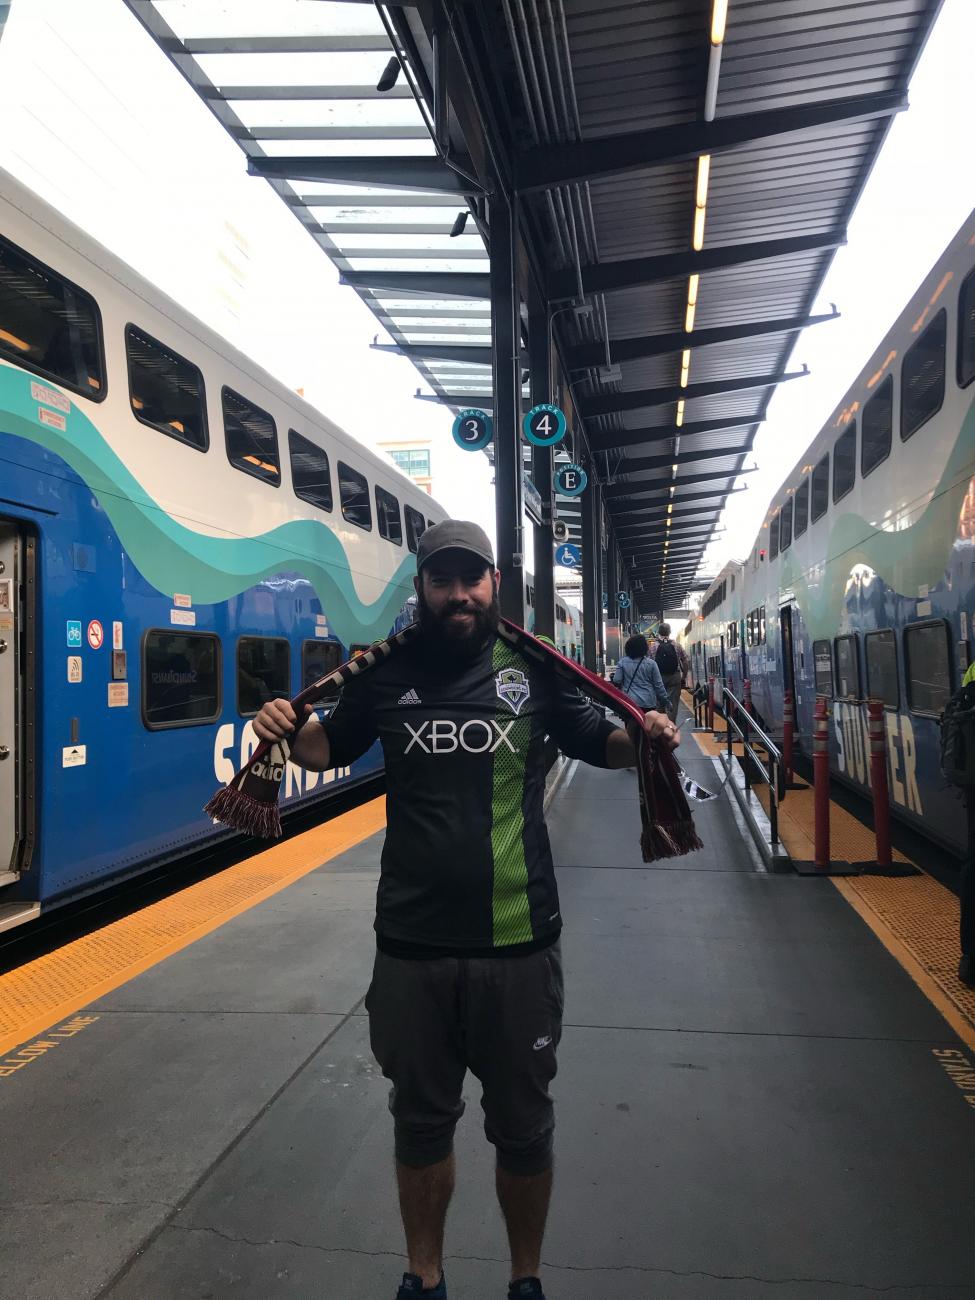 A man stands on the Sounder train platform, wearing a Sounders soccer team jersey and scarf.